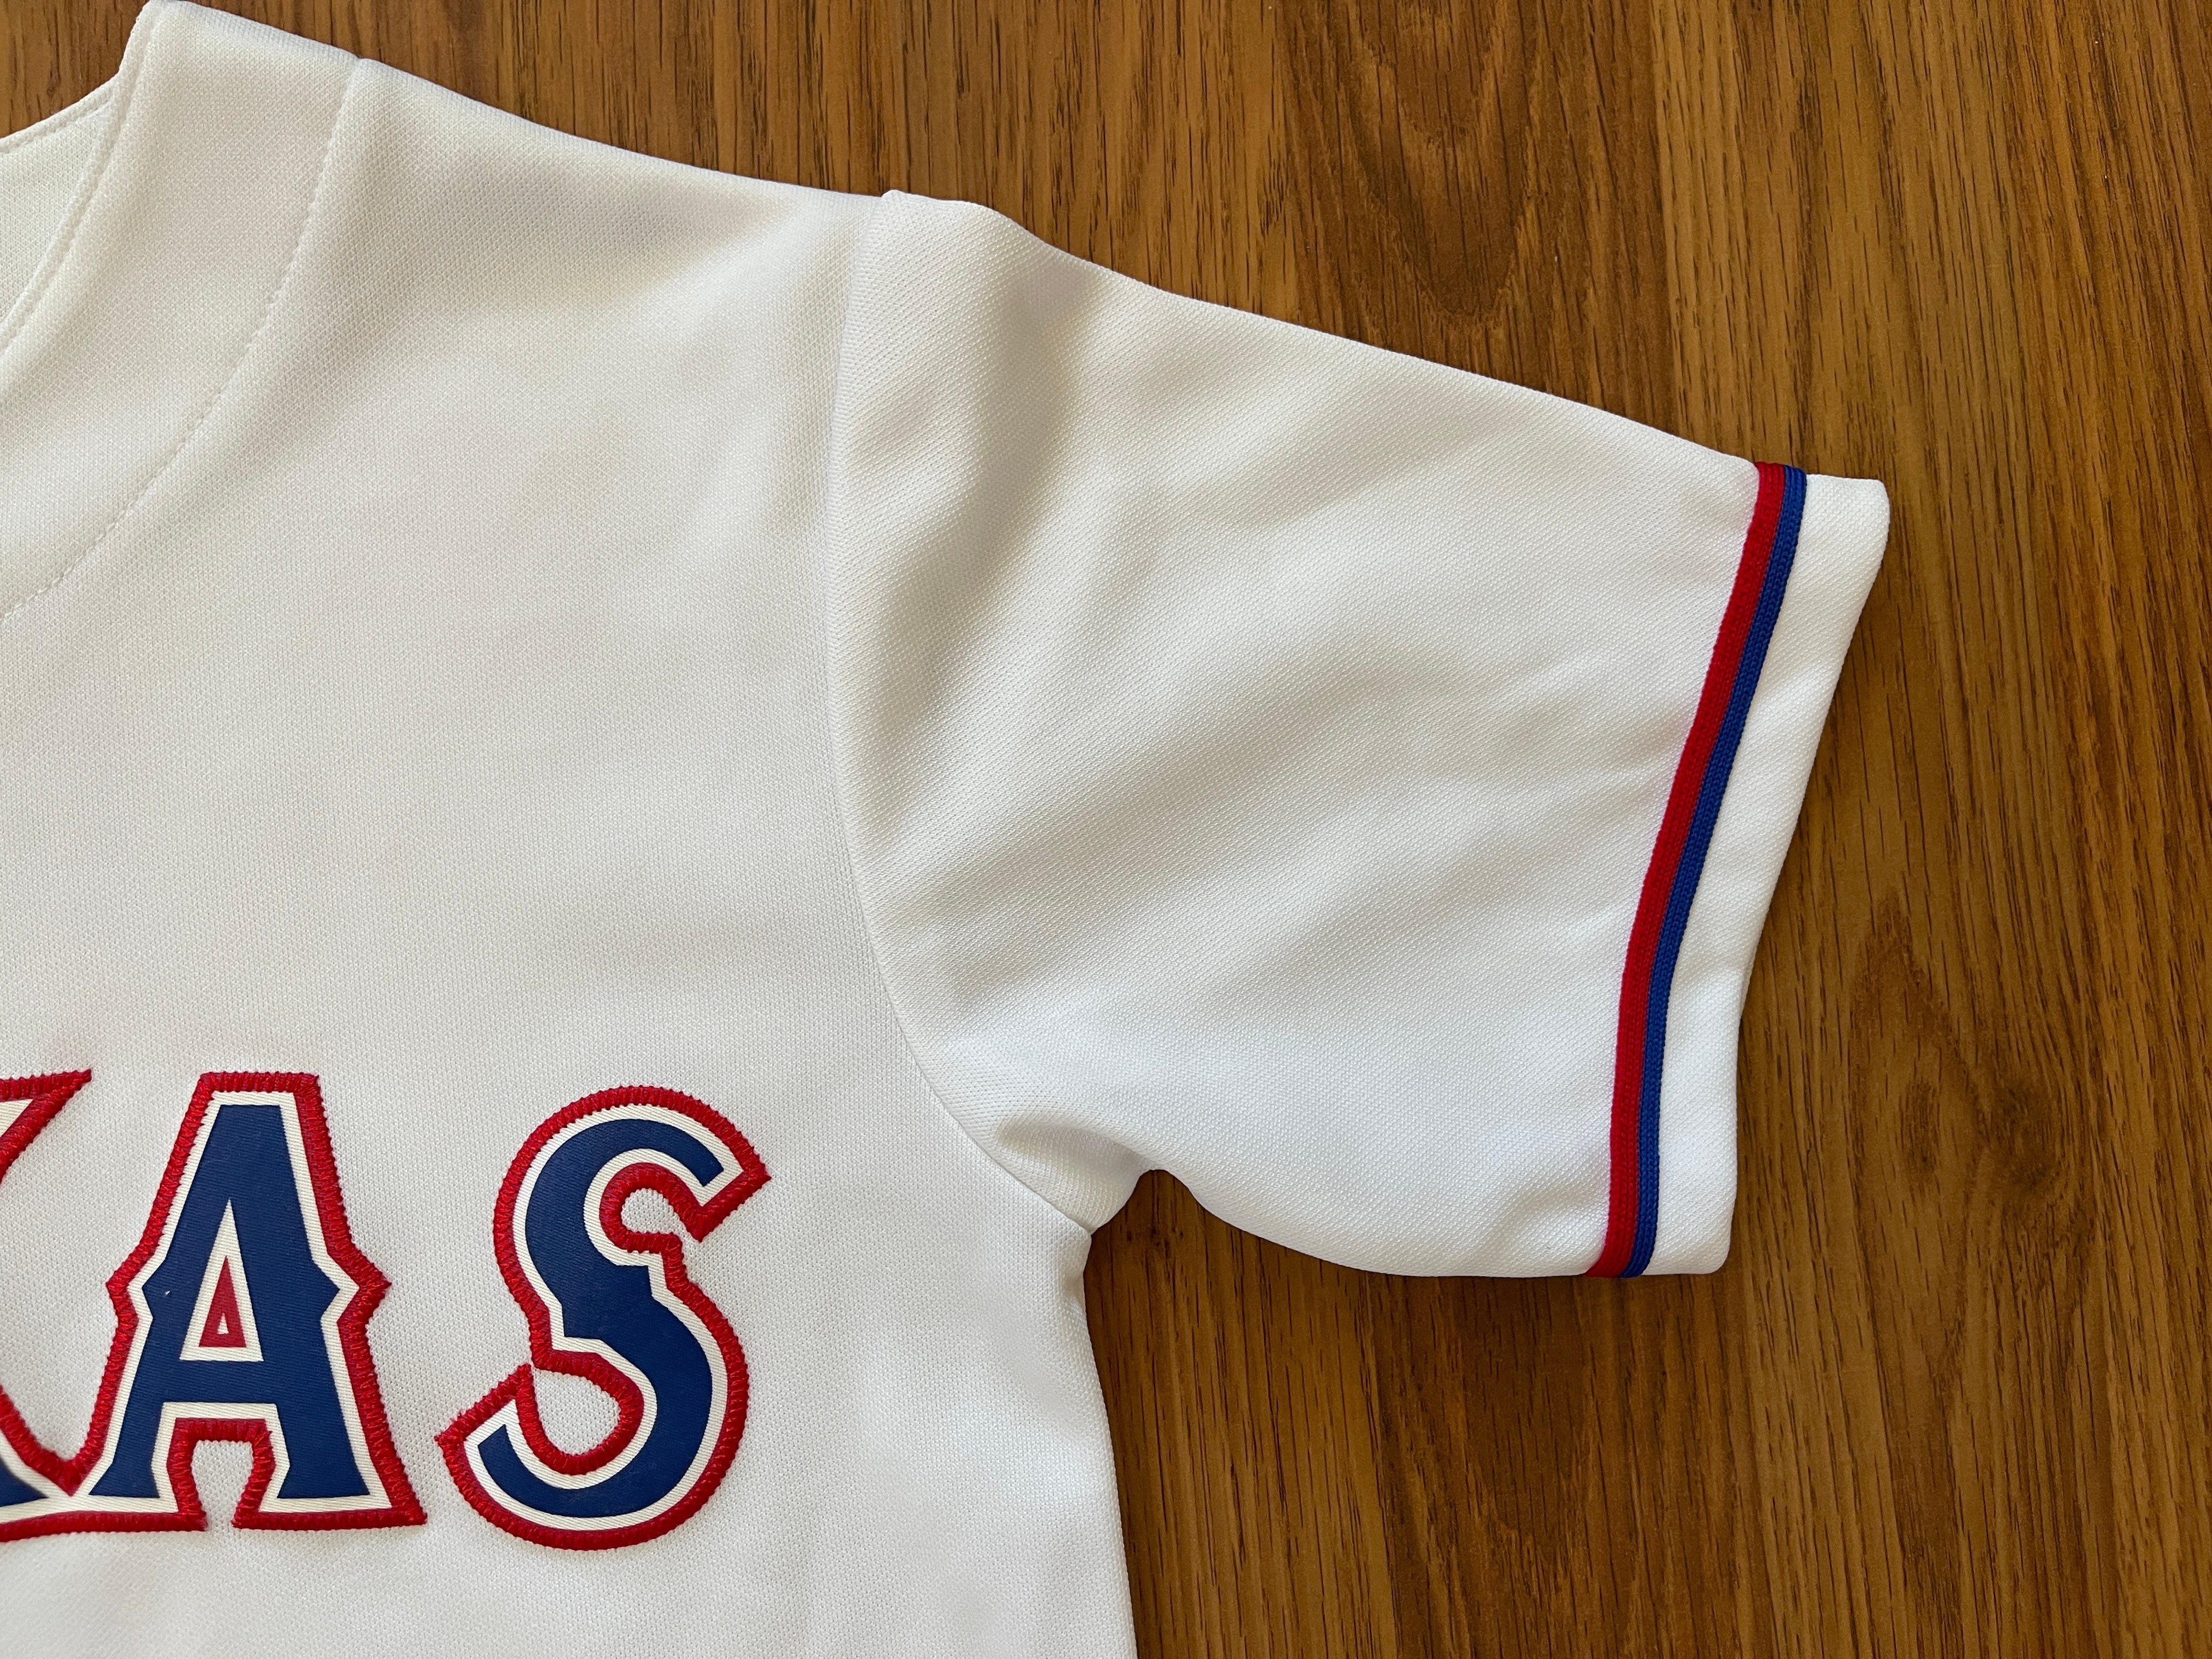 Rangers introduce Darvish with No. 11 jersey